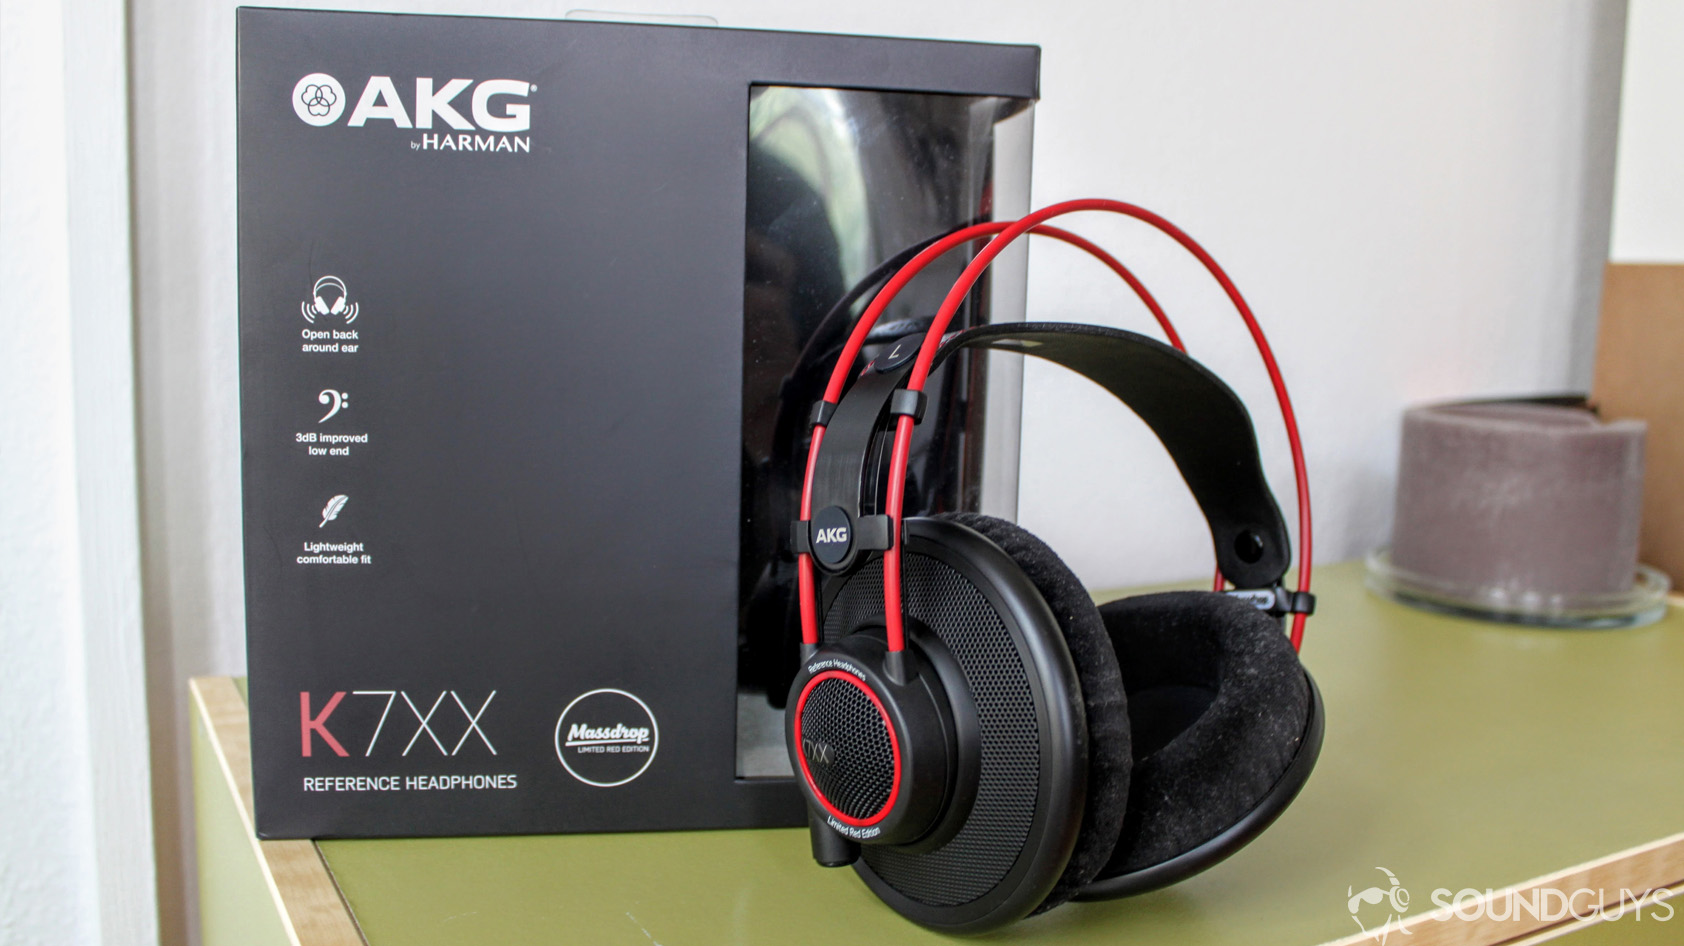 A photo of the AKG K7XX headphones and the packaging on a green desk. 